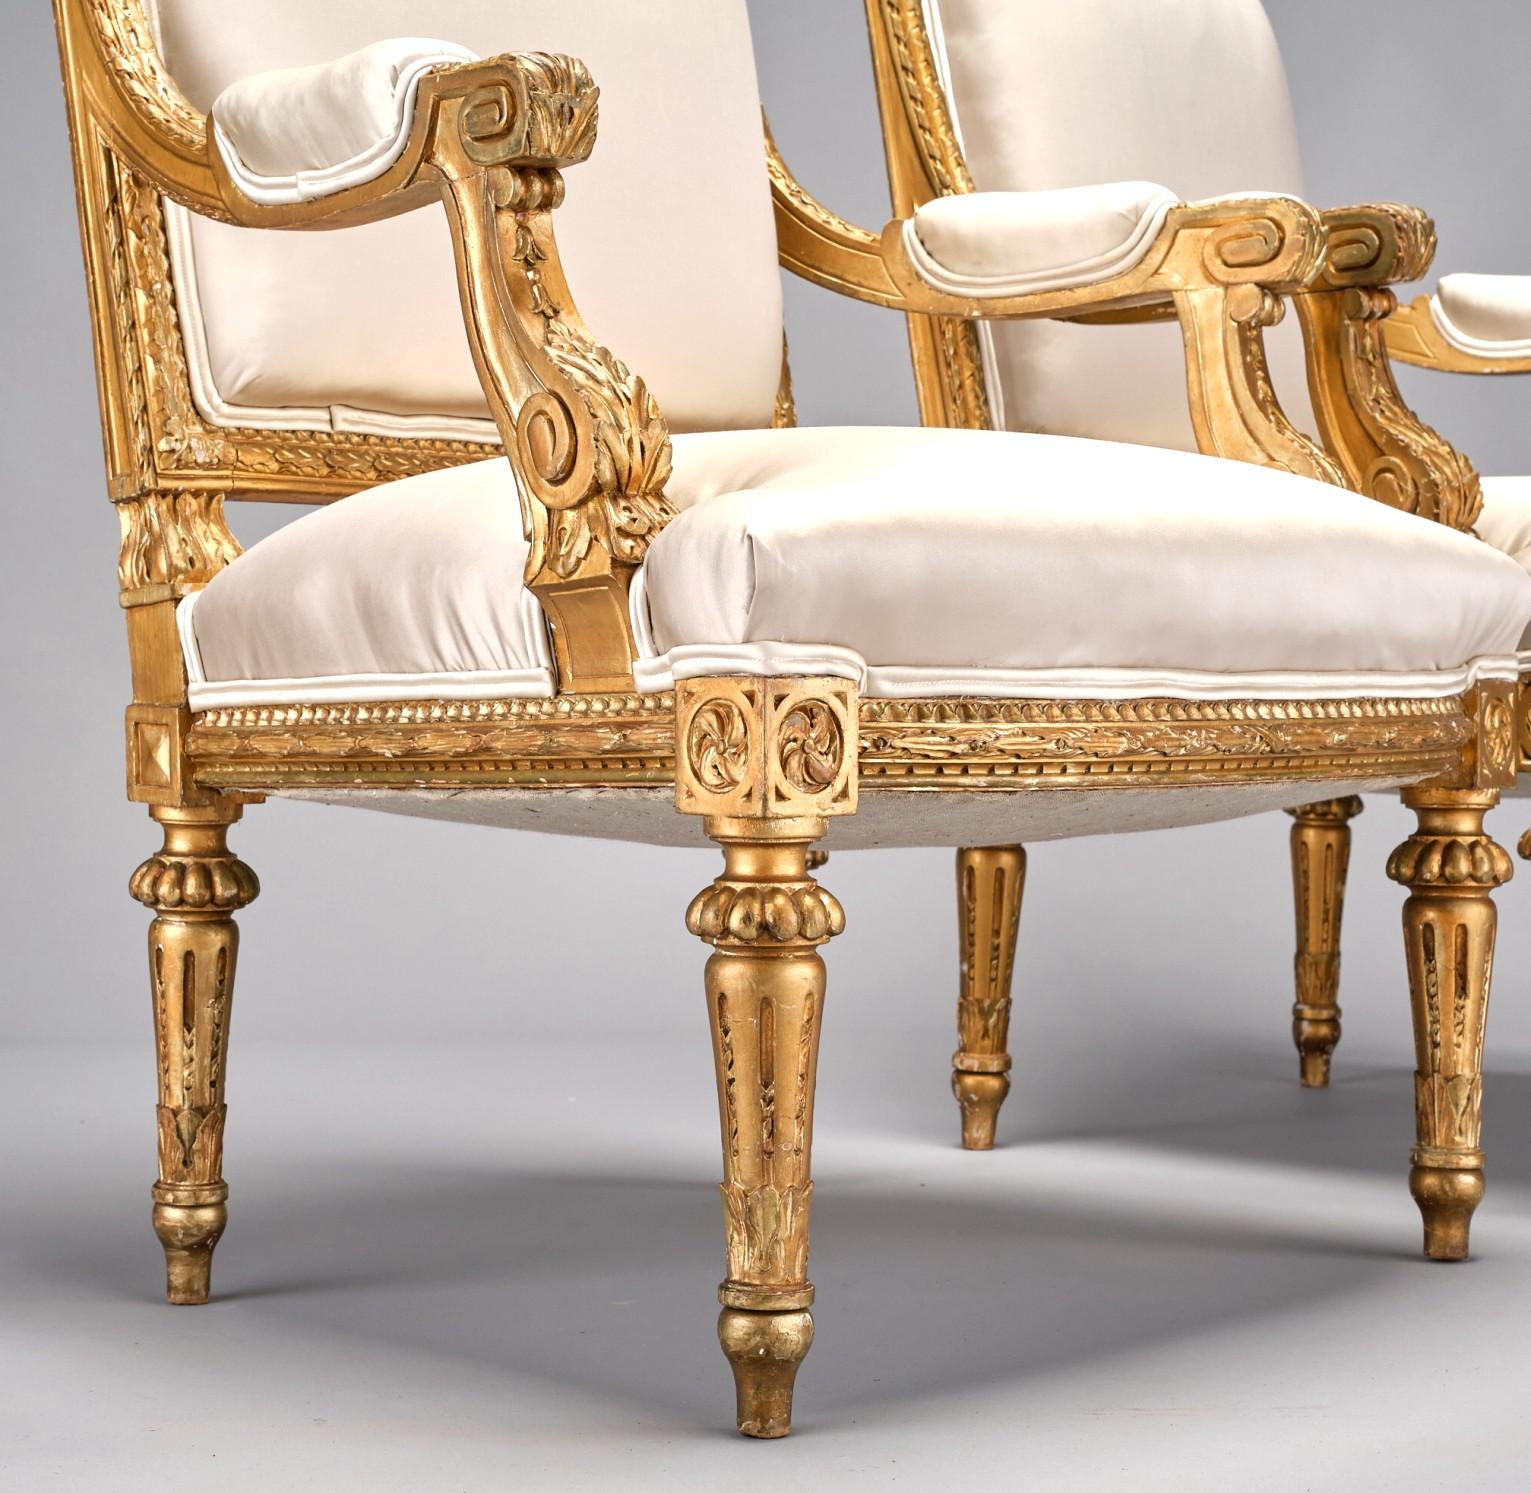 Pair of Louis XVI Style Giltwood Fauteuils / Armchairs, France Circa 1900 For Sale 1